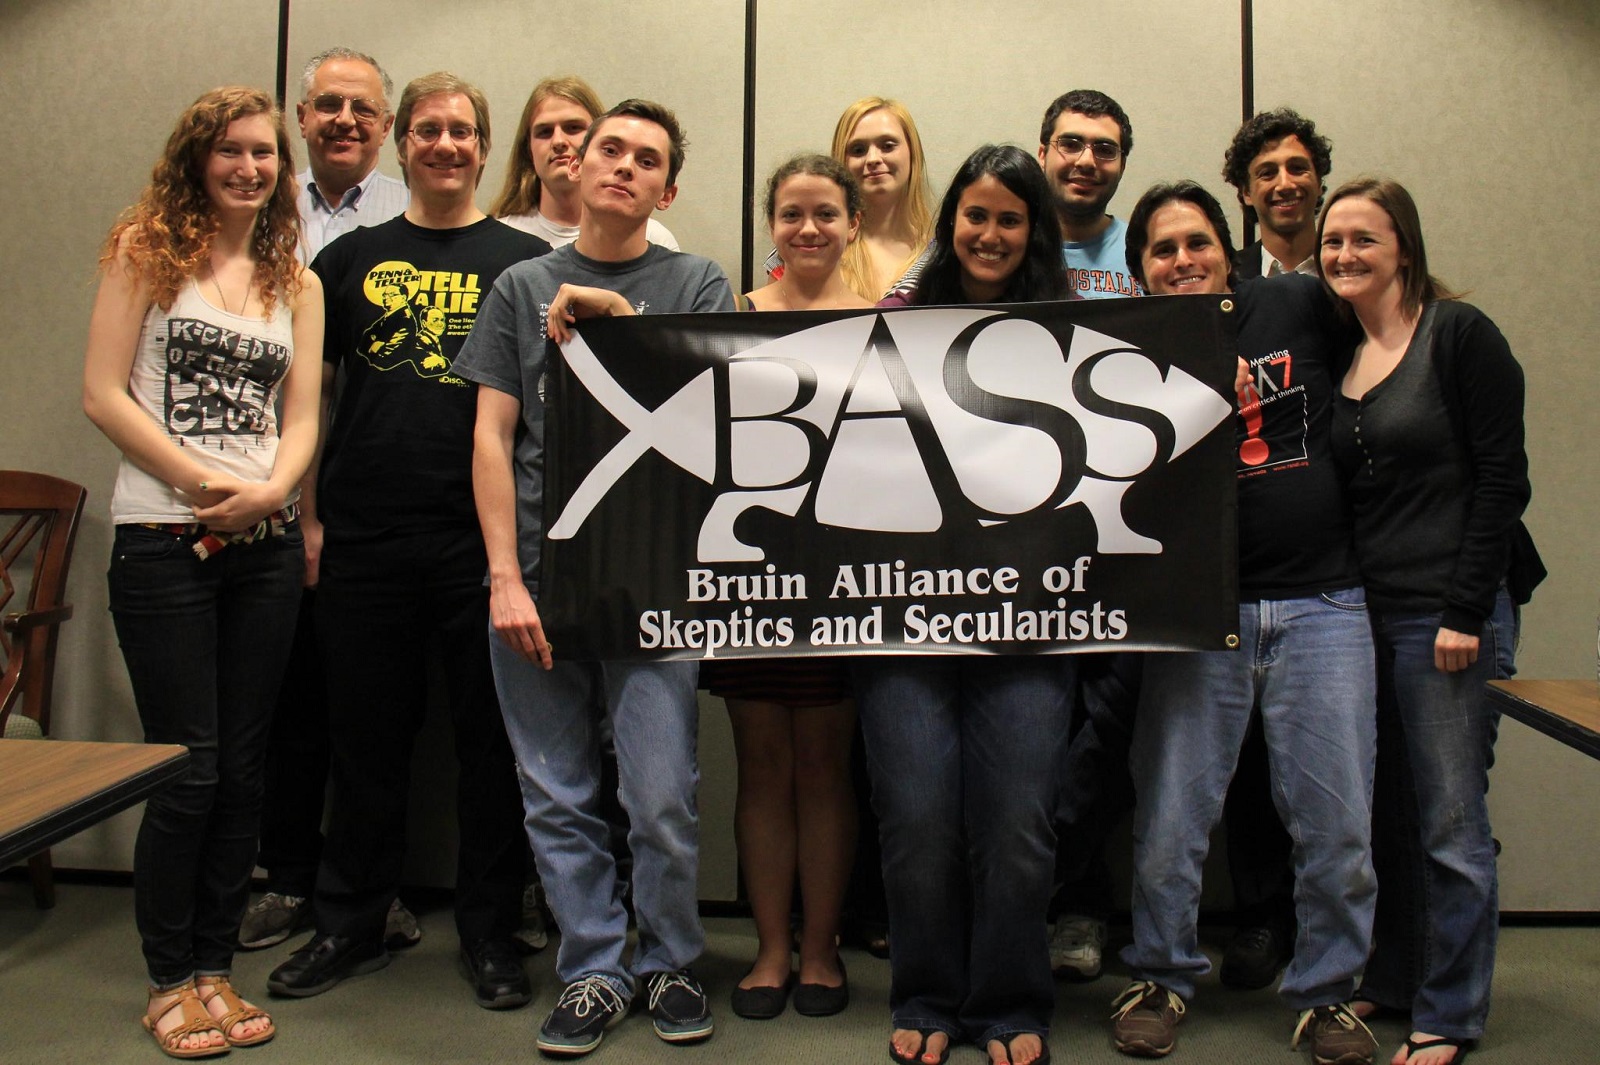 Bruin Alliance of Skeptics and Secularists